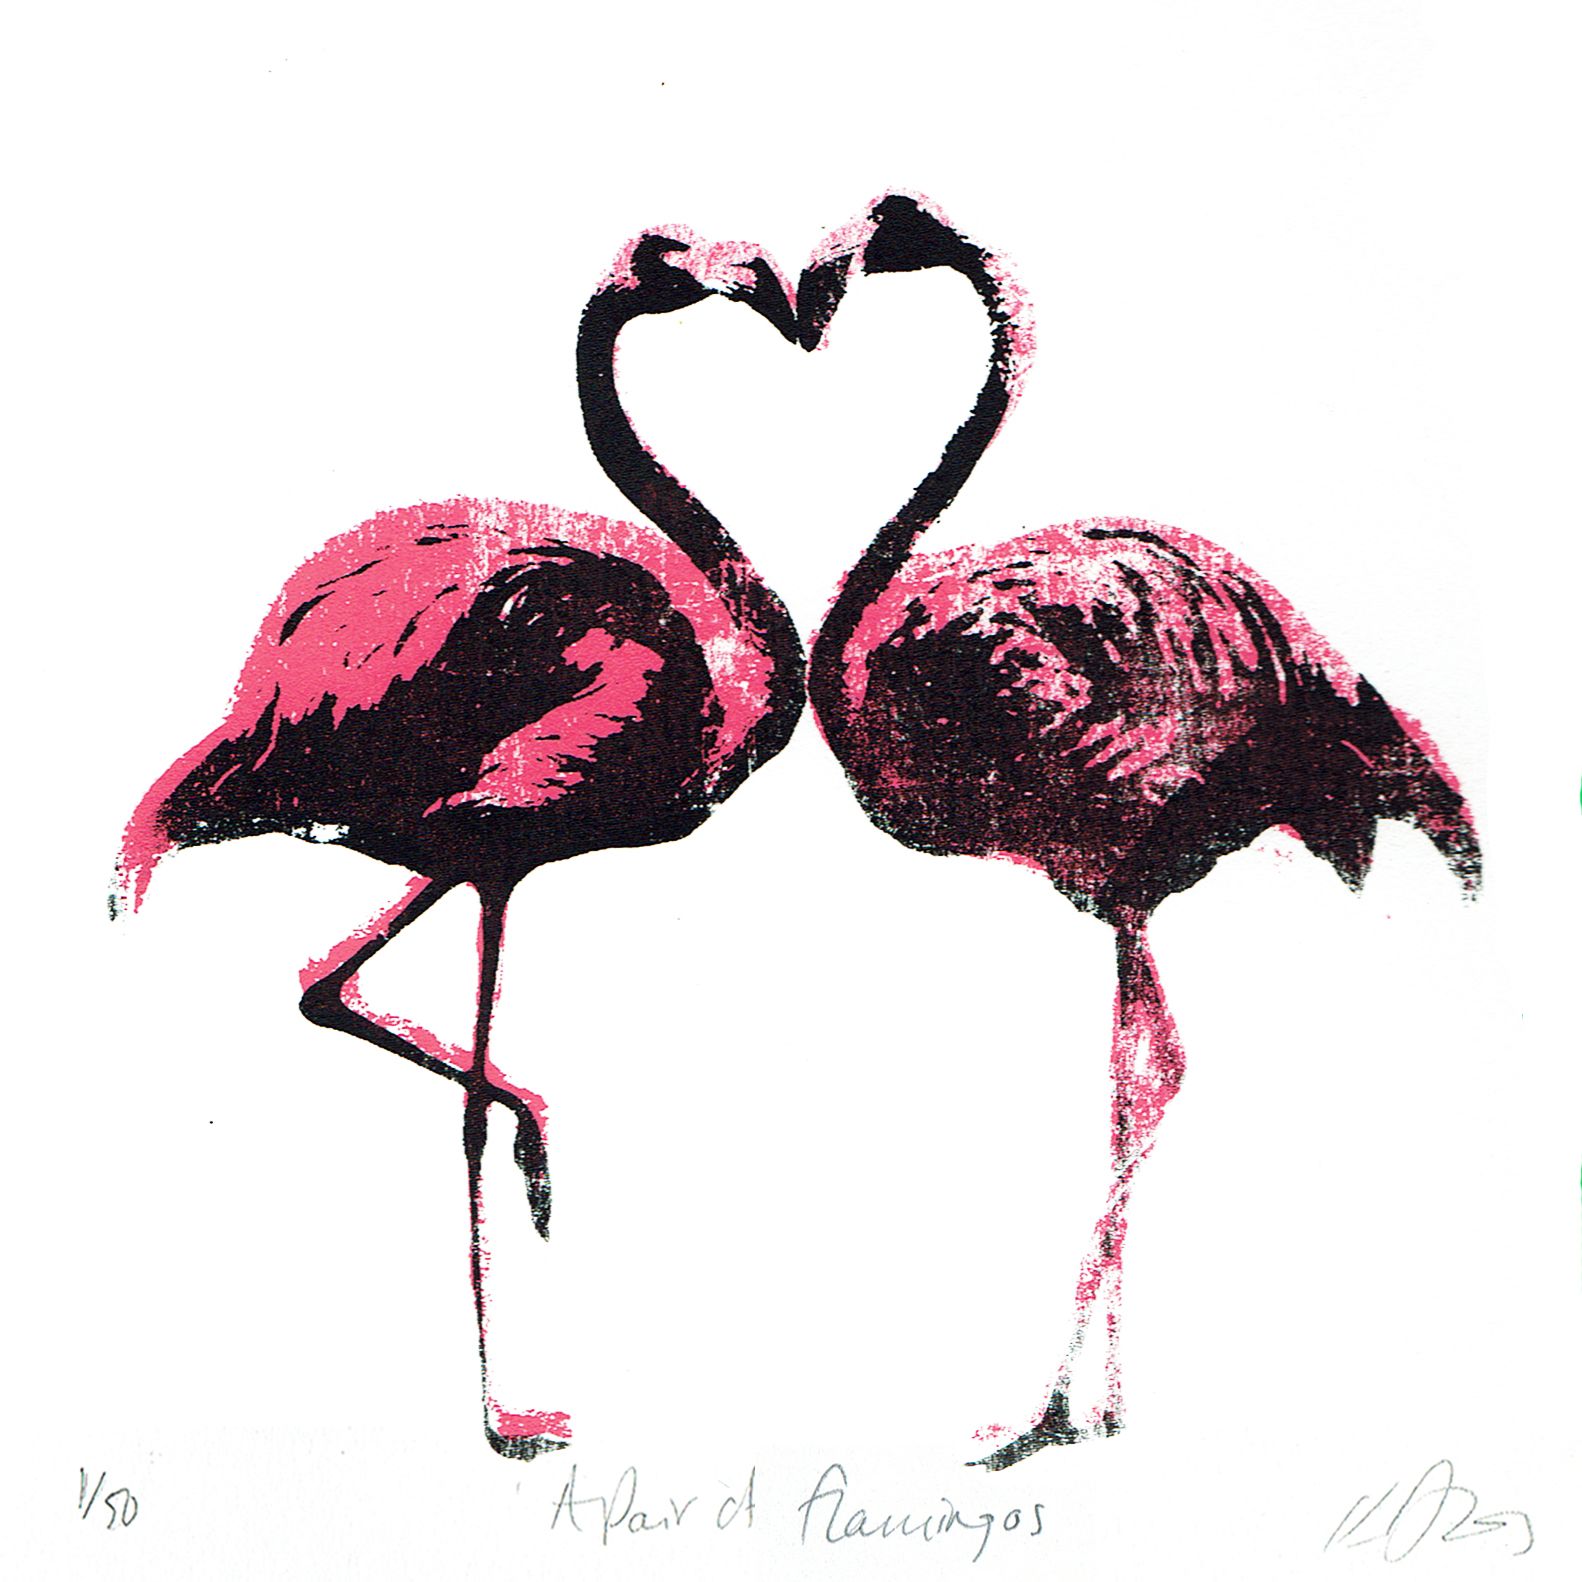 A Pair of Flamingos by Katie Edwards